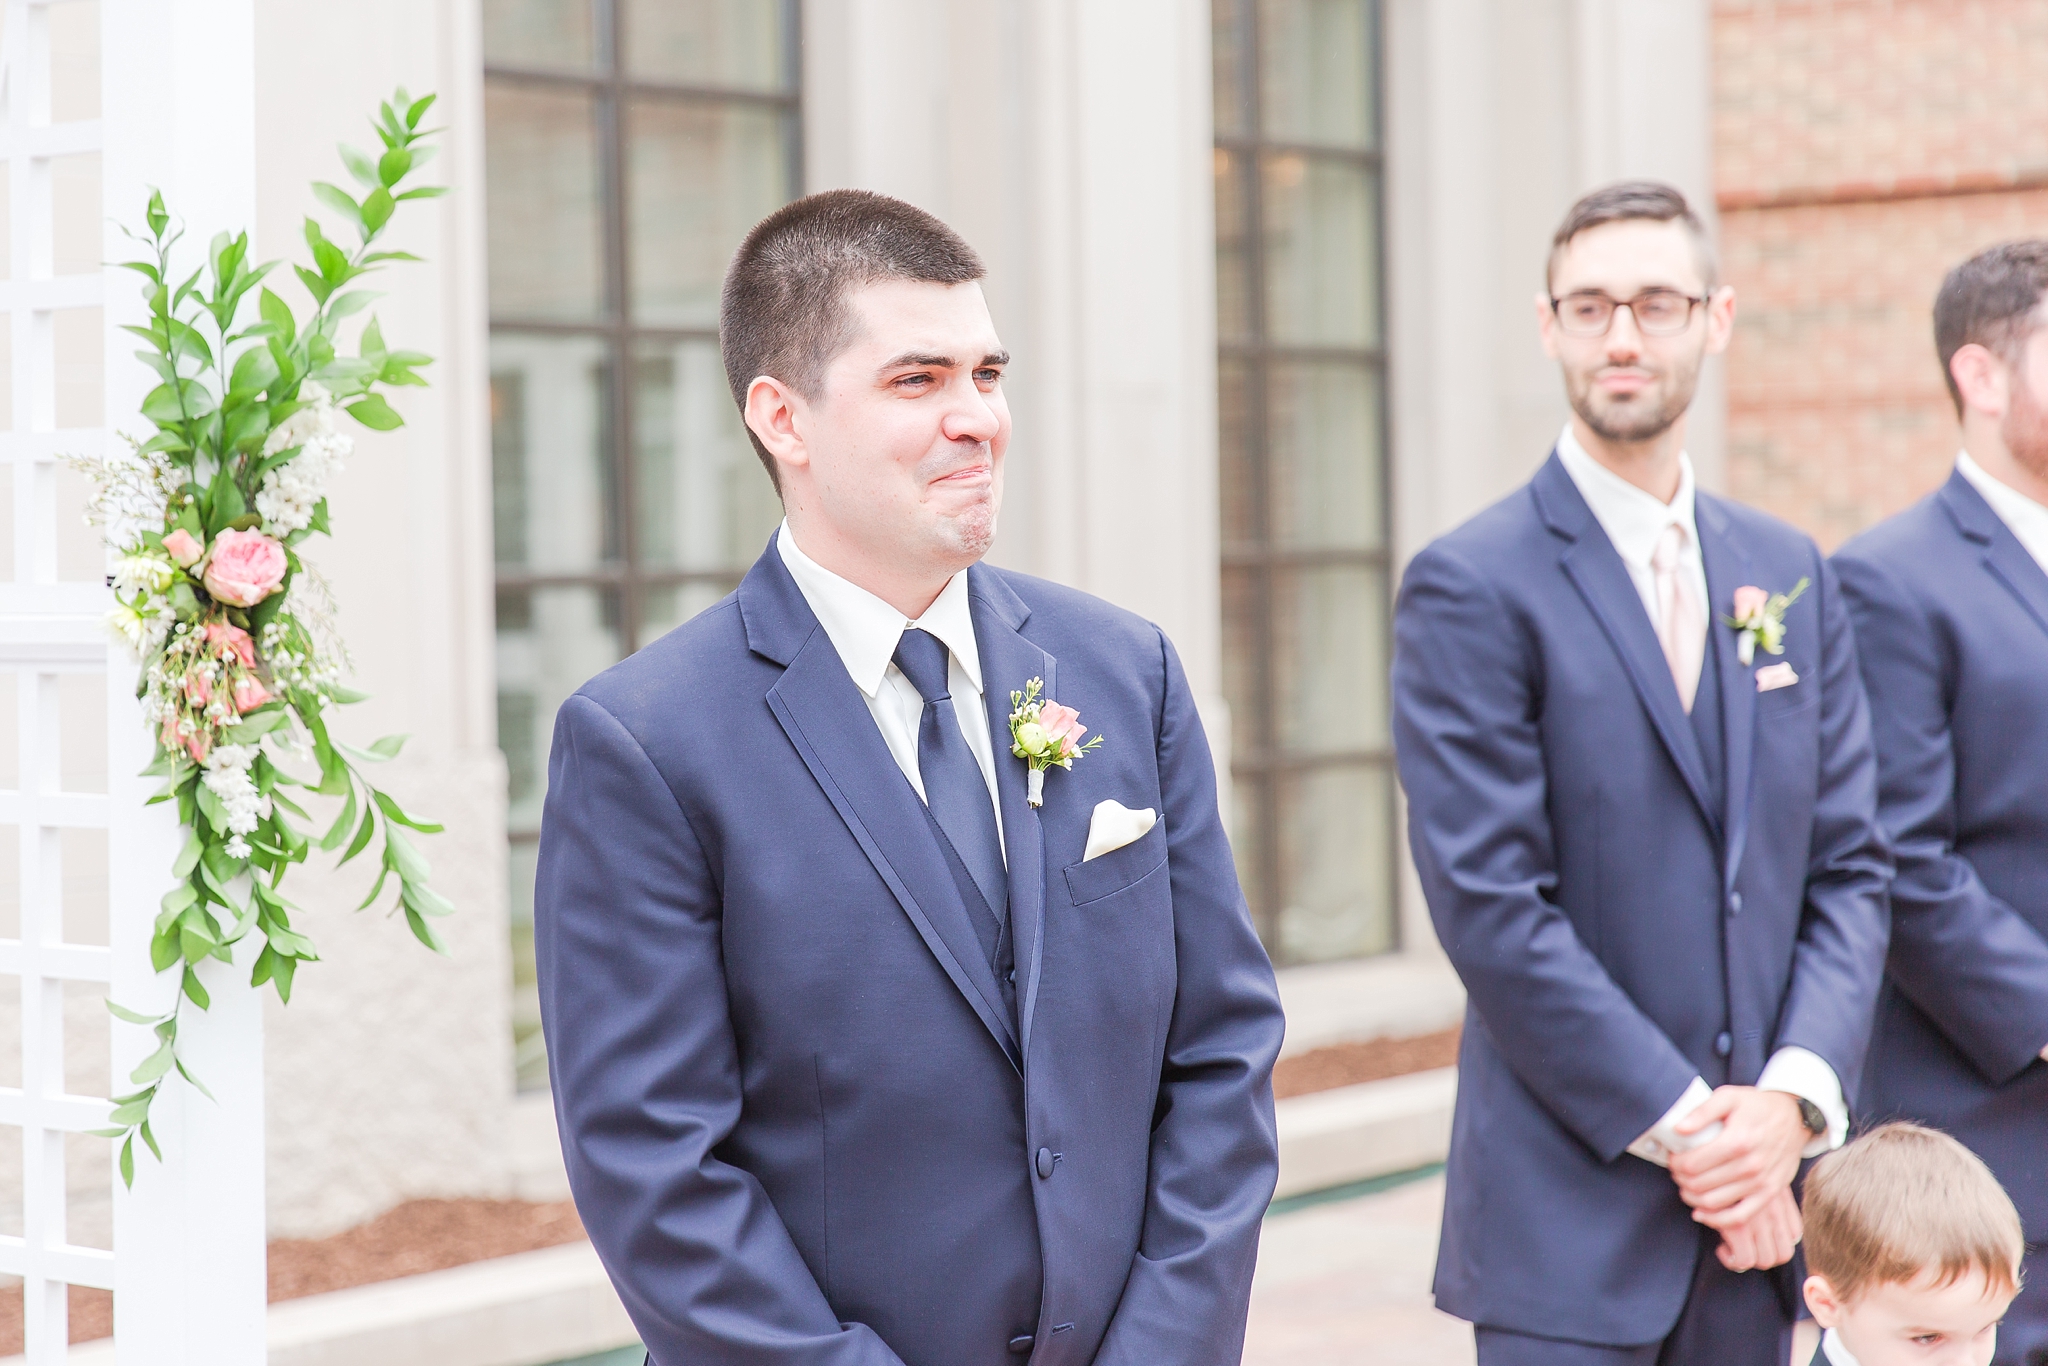 candid-romantic-wedding-photos-at-the-h-hotel-in-midland-michigan-by-courtney-carolyn-photography_0063.jpg